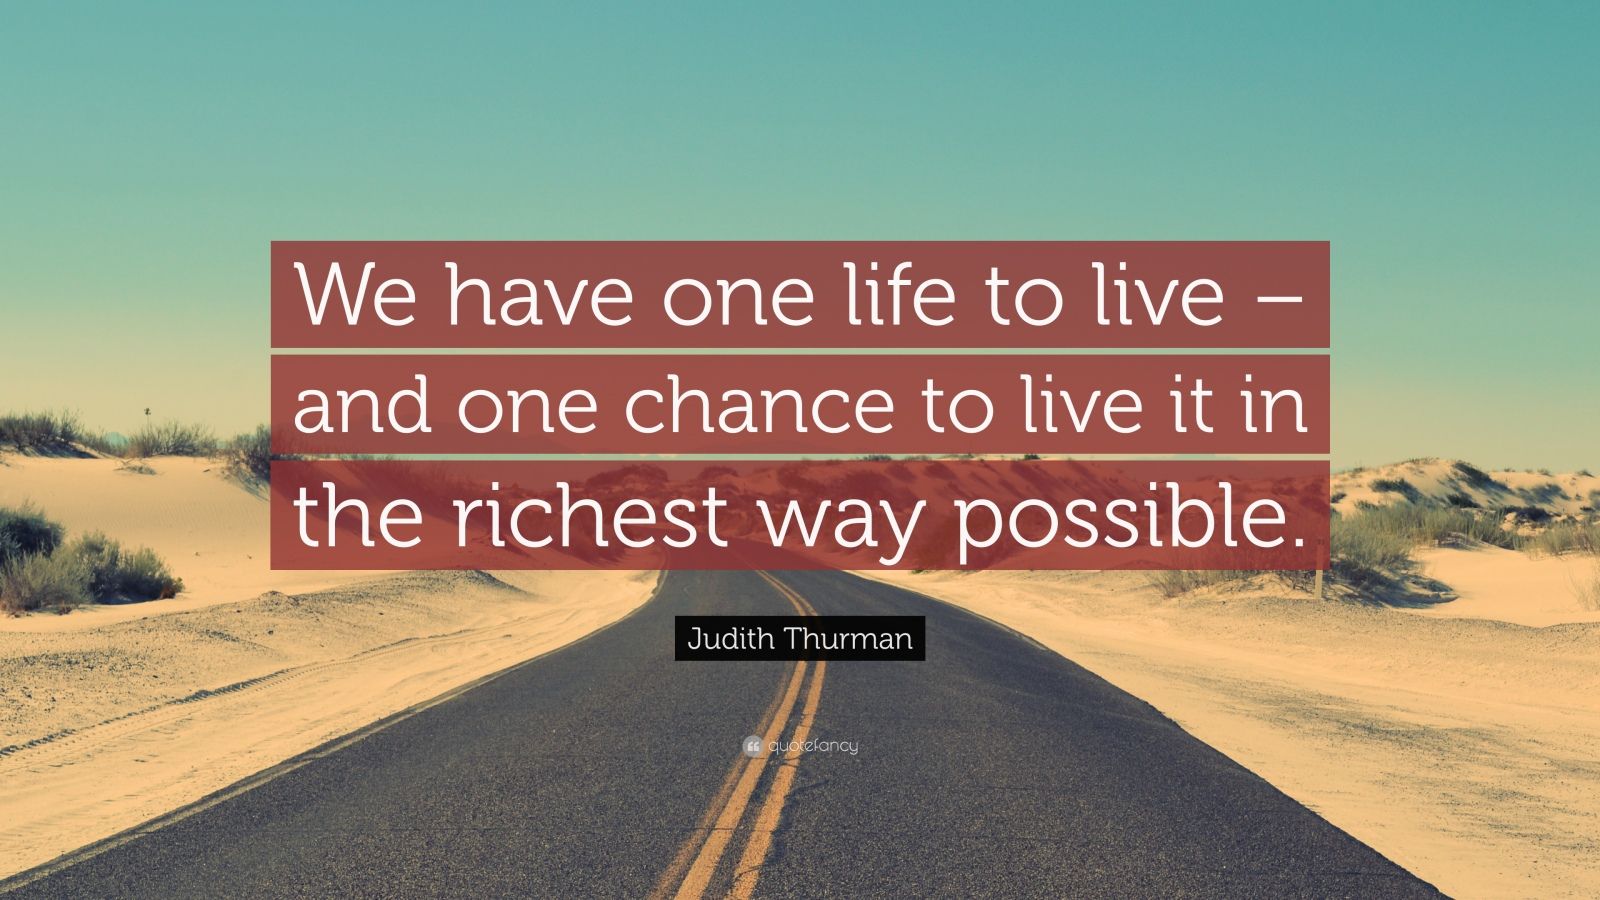 Judith Thurman Quote: “We have one life to live – and one chance to ...